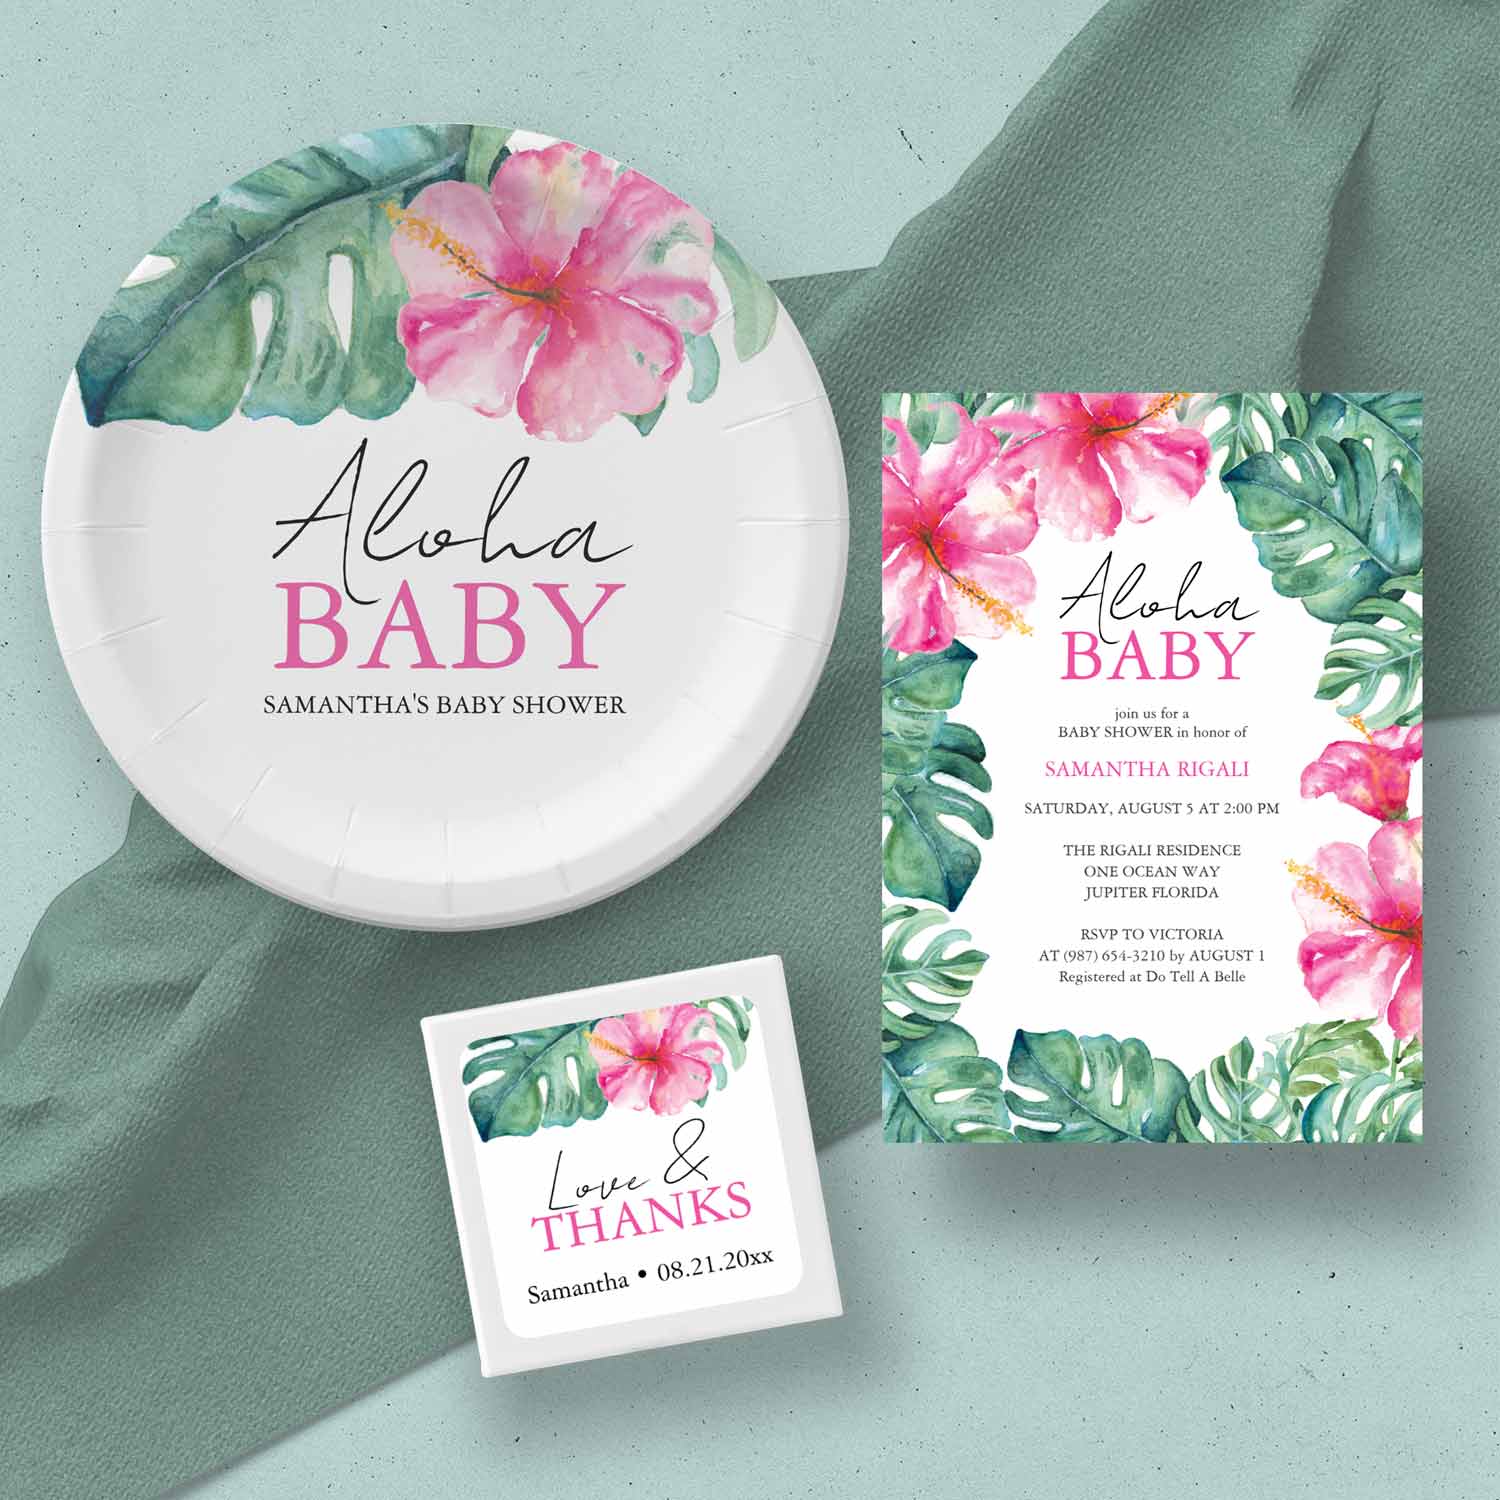 Luau baby shower ideas features unique baby shower invitations, adorable baby shower paper plates and baby shower party supplies featuring unique pink hibiscus flower art by Victoria Grigaliunas of Do Tell A Belle. Click to shop the complete line.